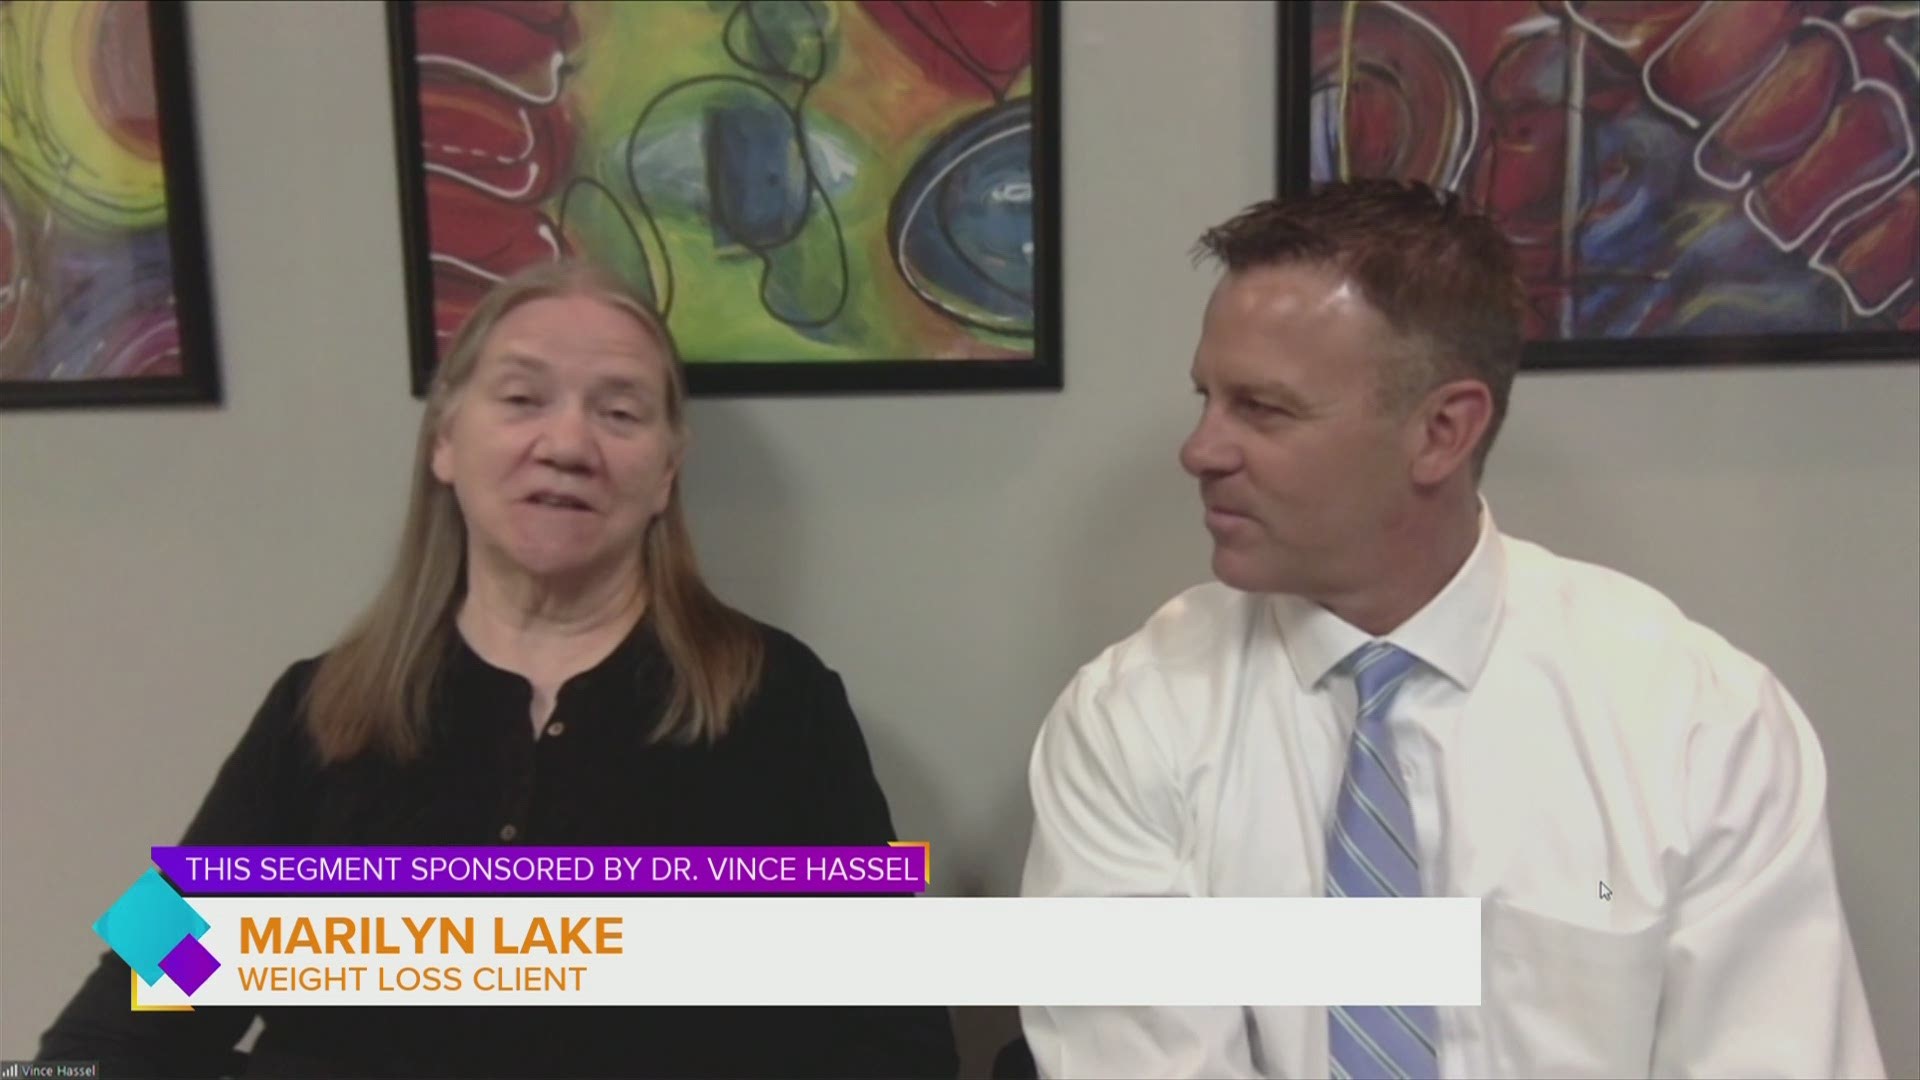 Marilyn Lake doesn't text or email, so daily phone calls to Dr. Vince Hassel helped her lose 26.7lbs & 28 inches with ChiroThin weight loss program! | Paid Content